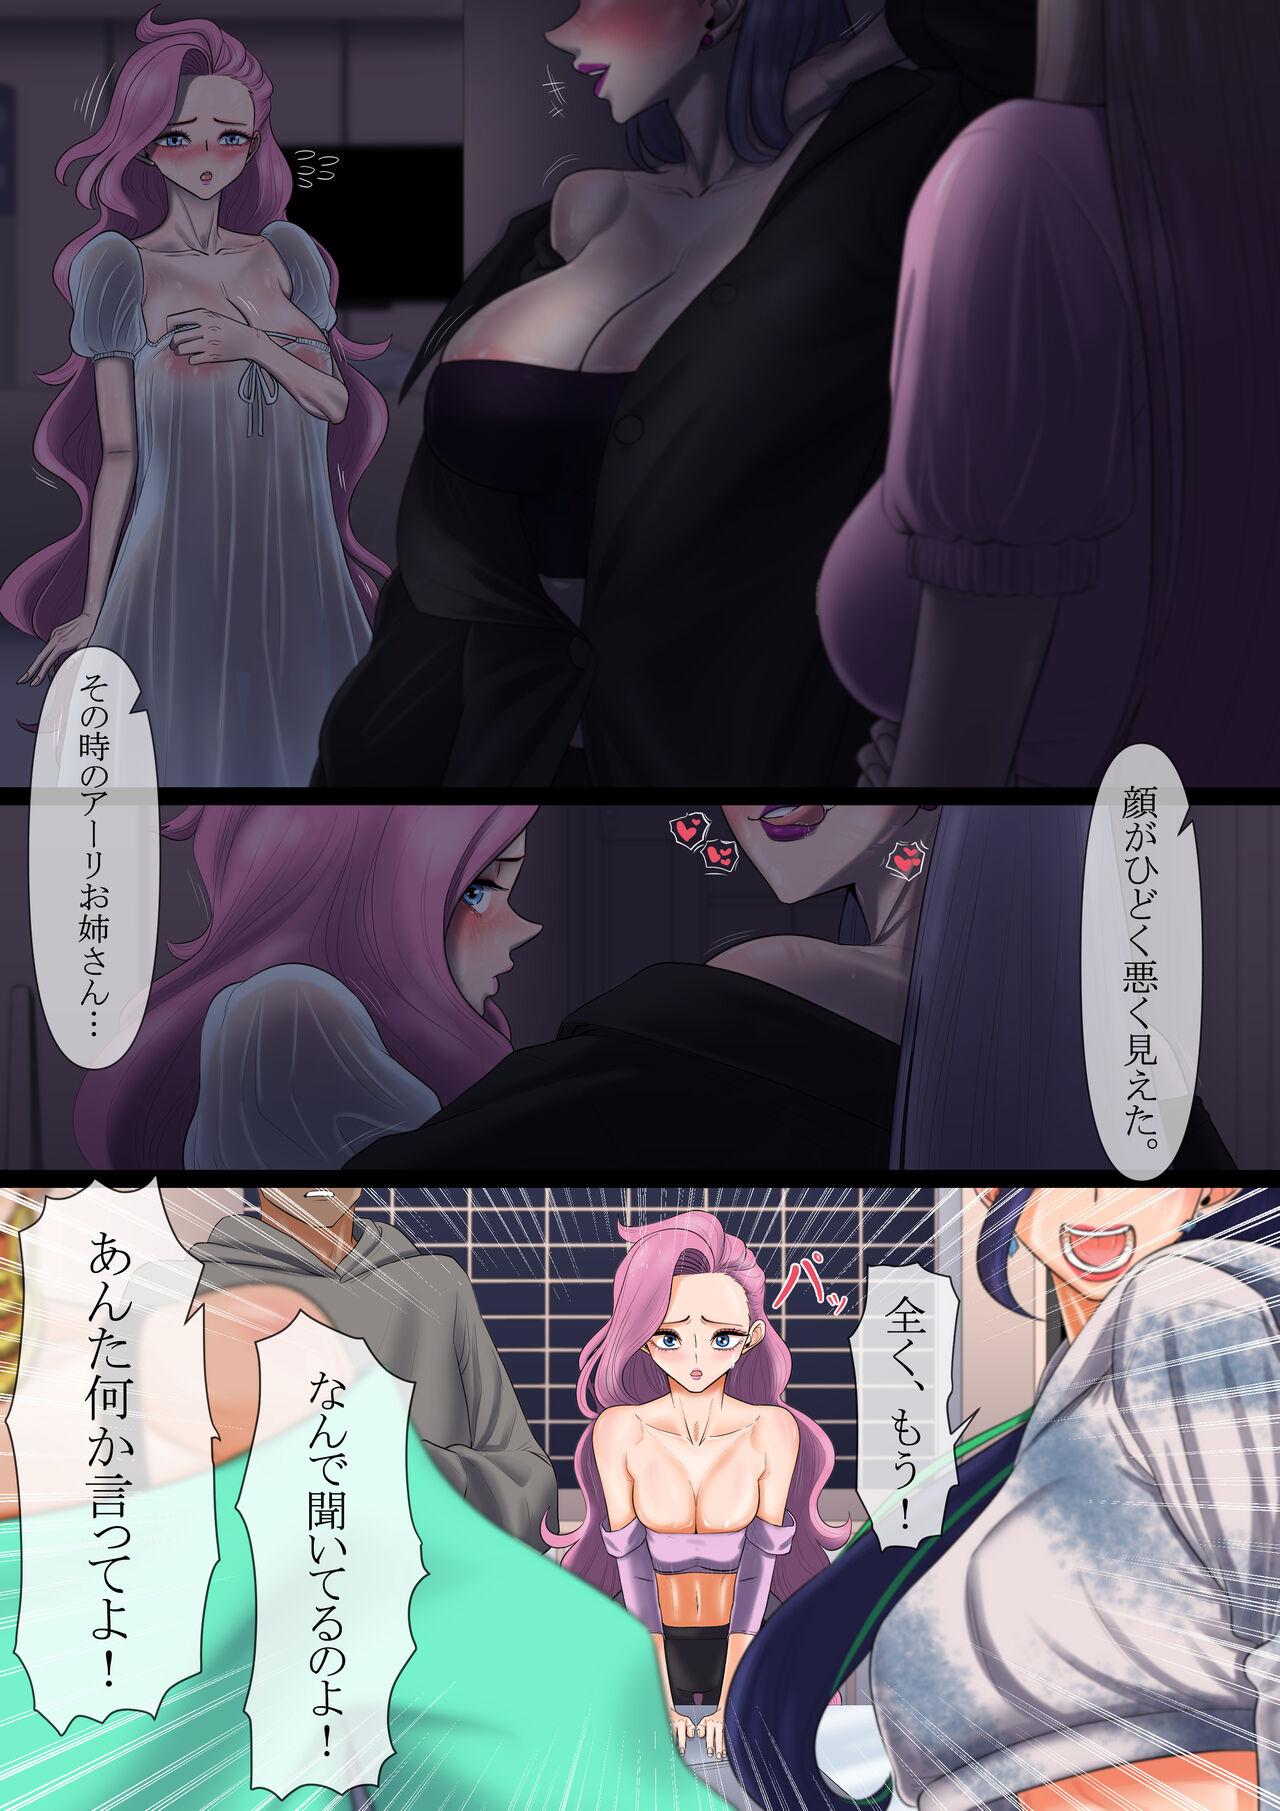 Milfsex 守りたいもの... - League of legends Close Up - Page 4